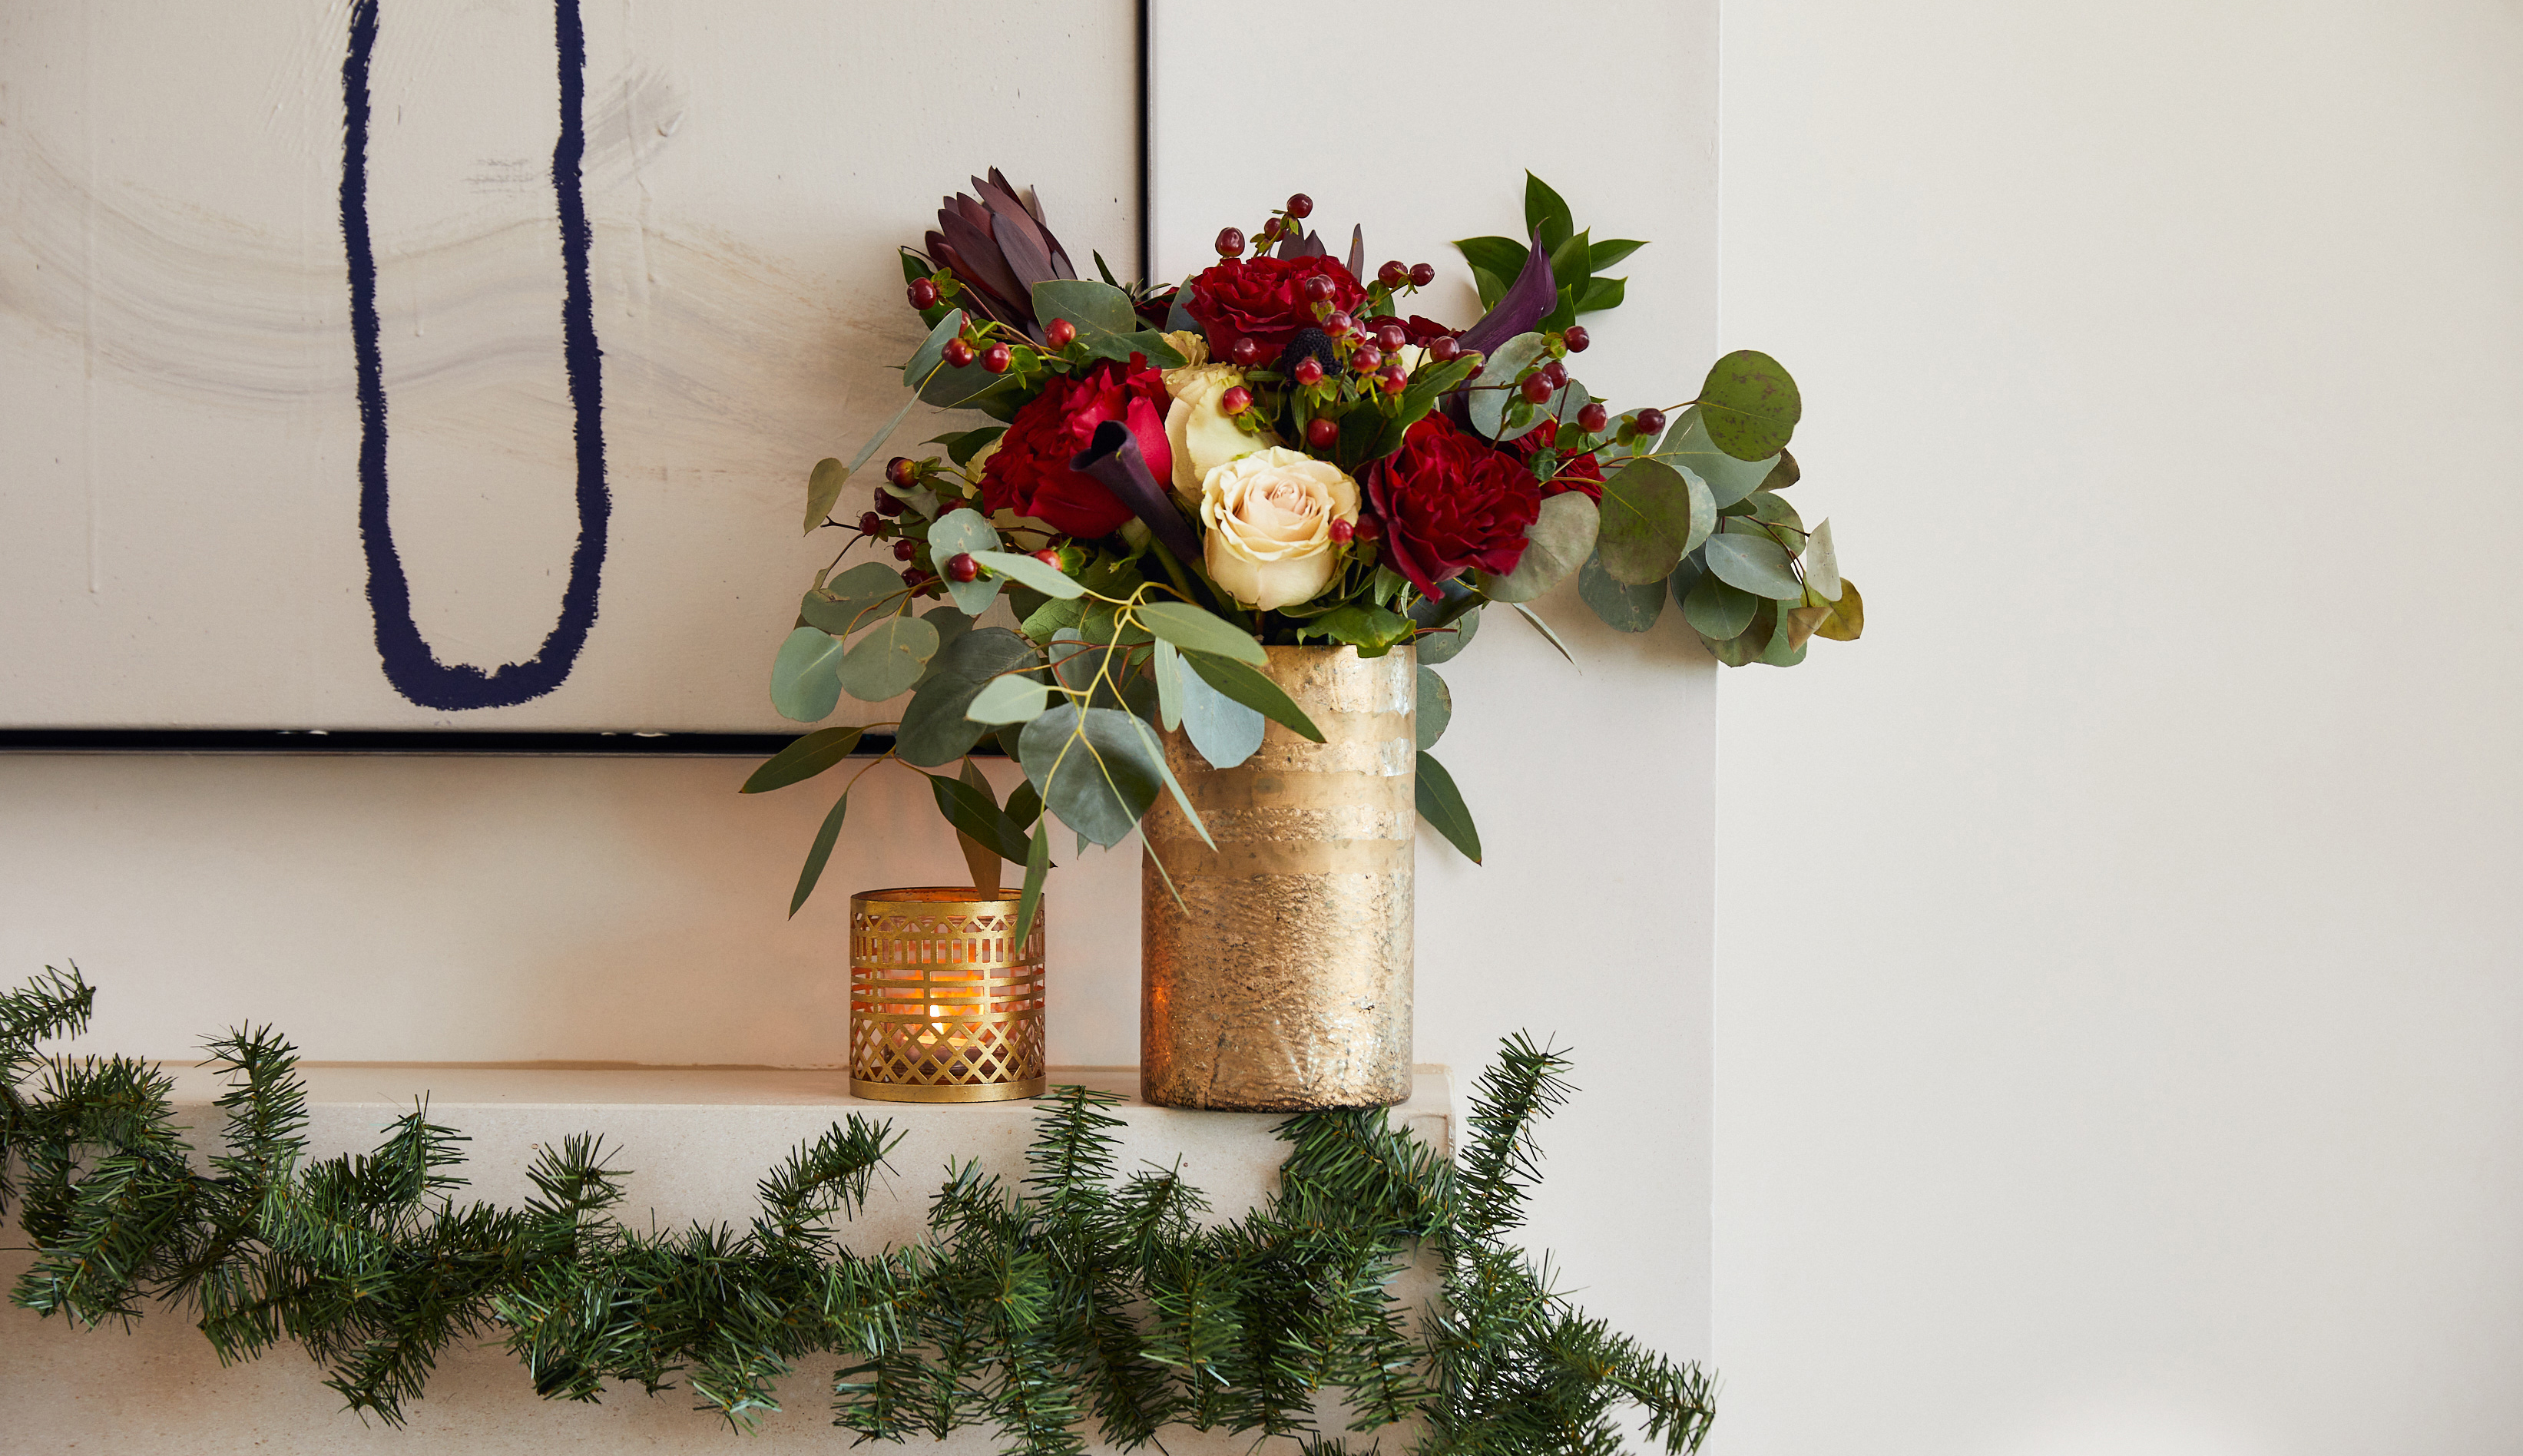 Mantel decorated with holiday flowers